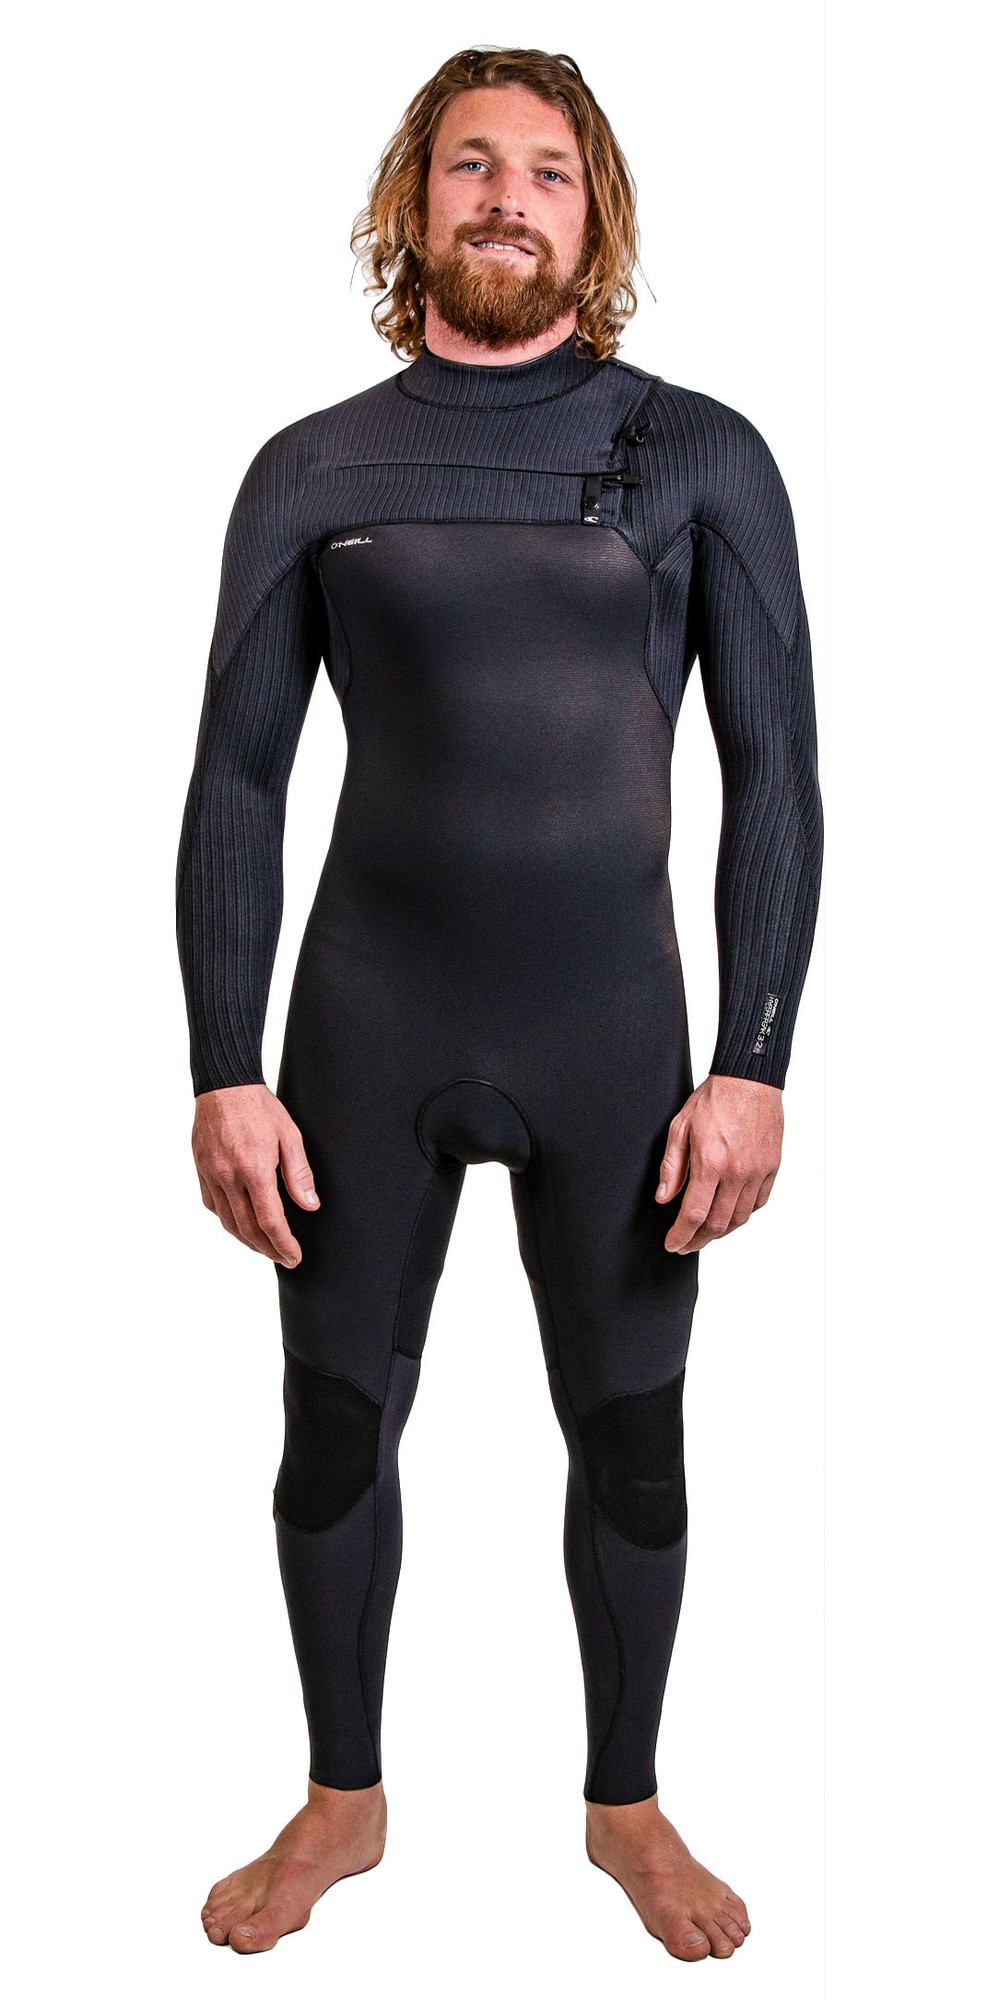 Chest Zip Entry over a 360° Barrier with Drain Holes ONeill Mens HyperFreak 5/4+mm Chest Zip Wetsuit Raven Black